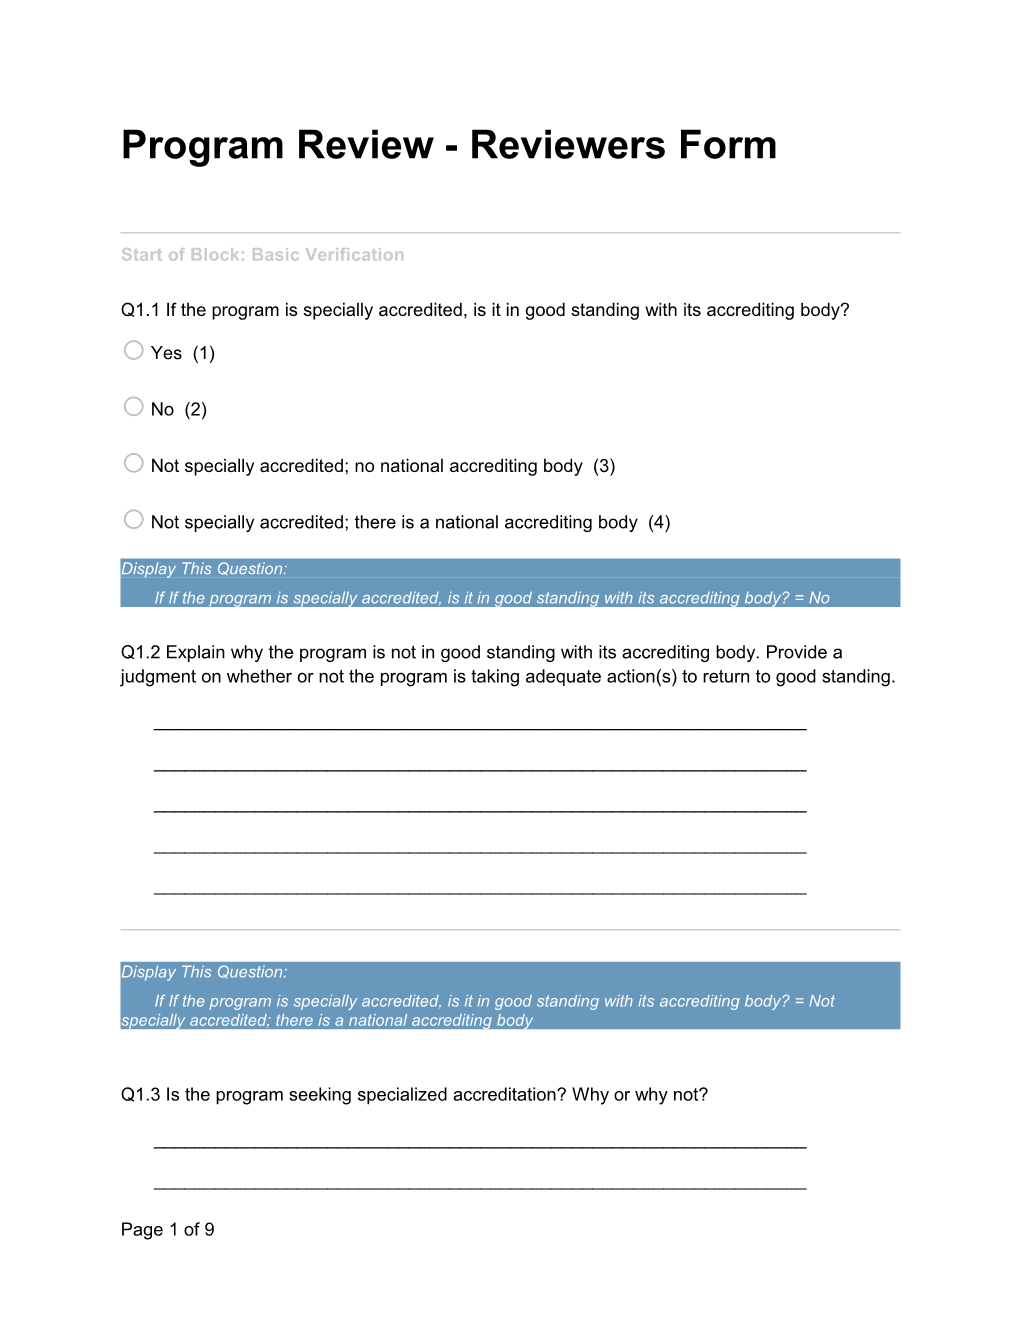 Program Review - Reviewers Form